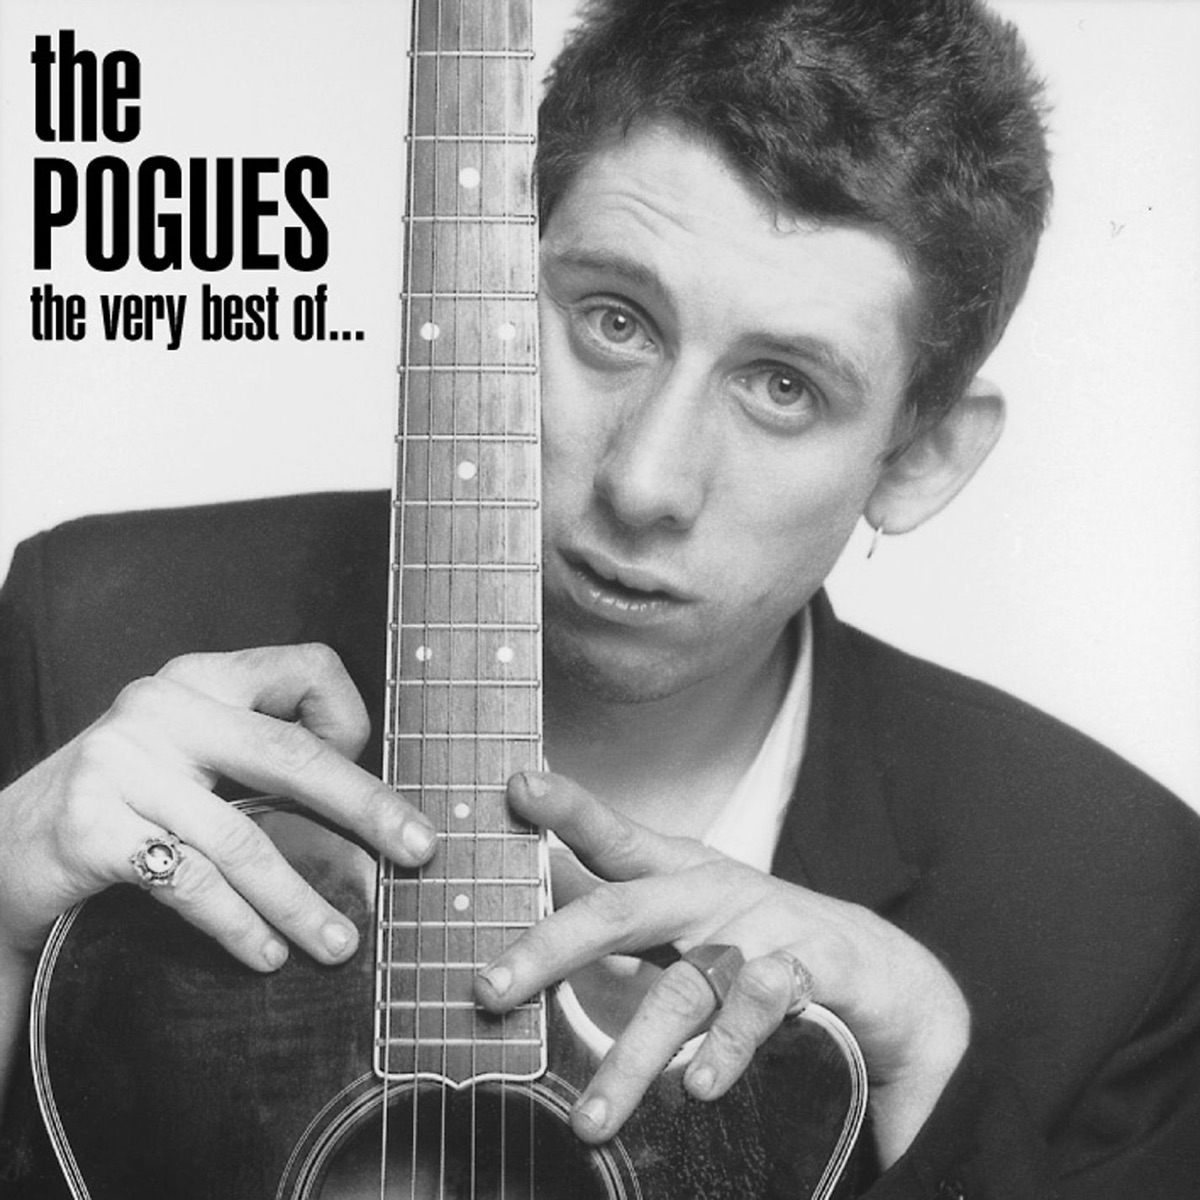 The Pogues - Albums, Songs, and News